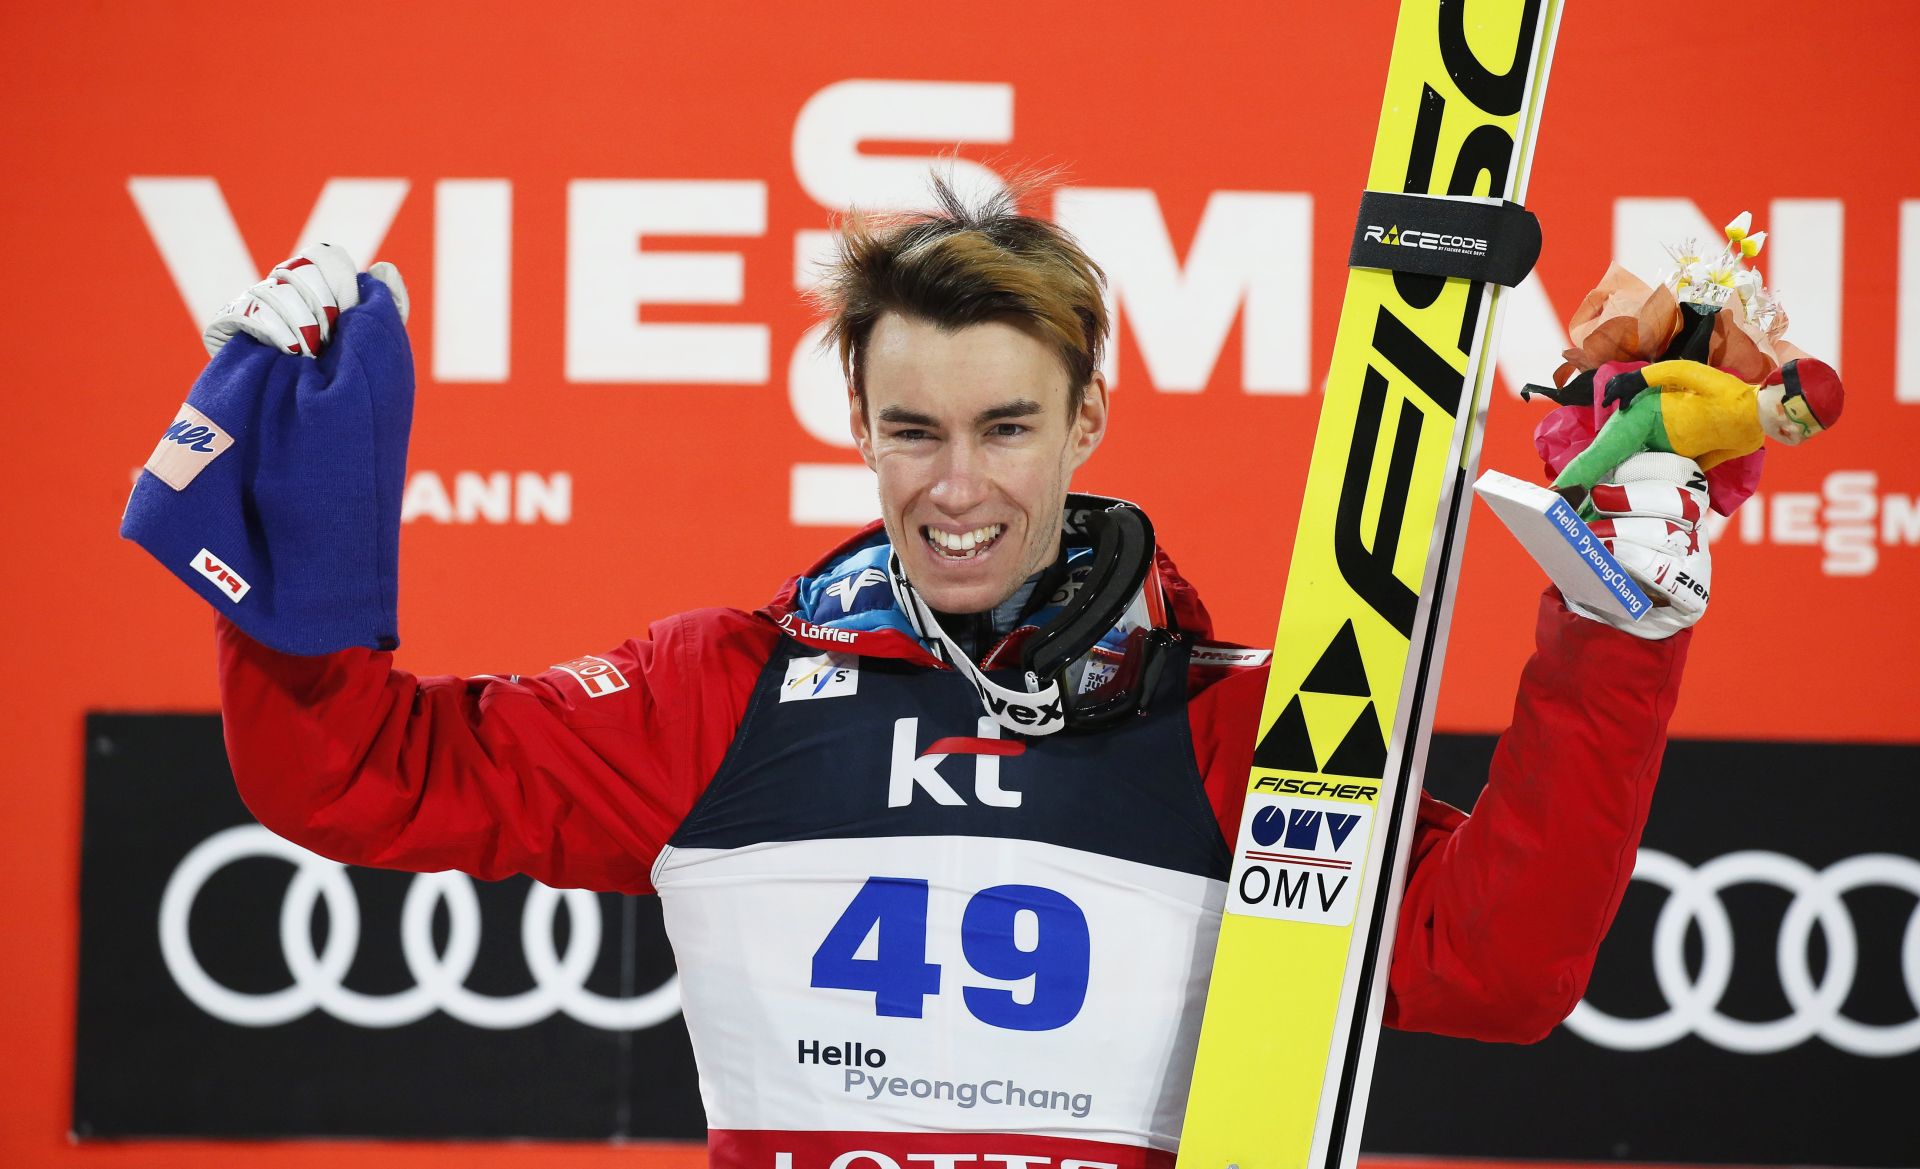 epa05794724 Stefan Kraft of Austria celebrates on the podium after winning the men's Large Hill Individual competition of the FIS Ski Jumping World Cup in Pyeongchang, South Korea, 15 February 2017.  EPA/JEON HEON-KYUN